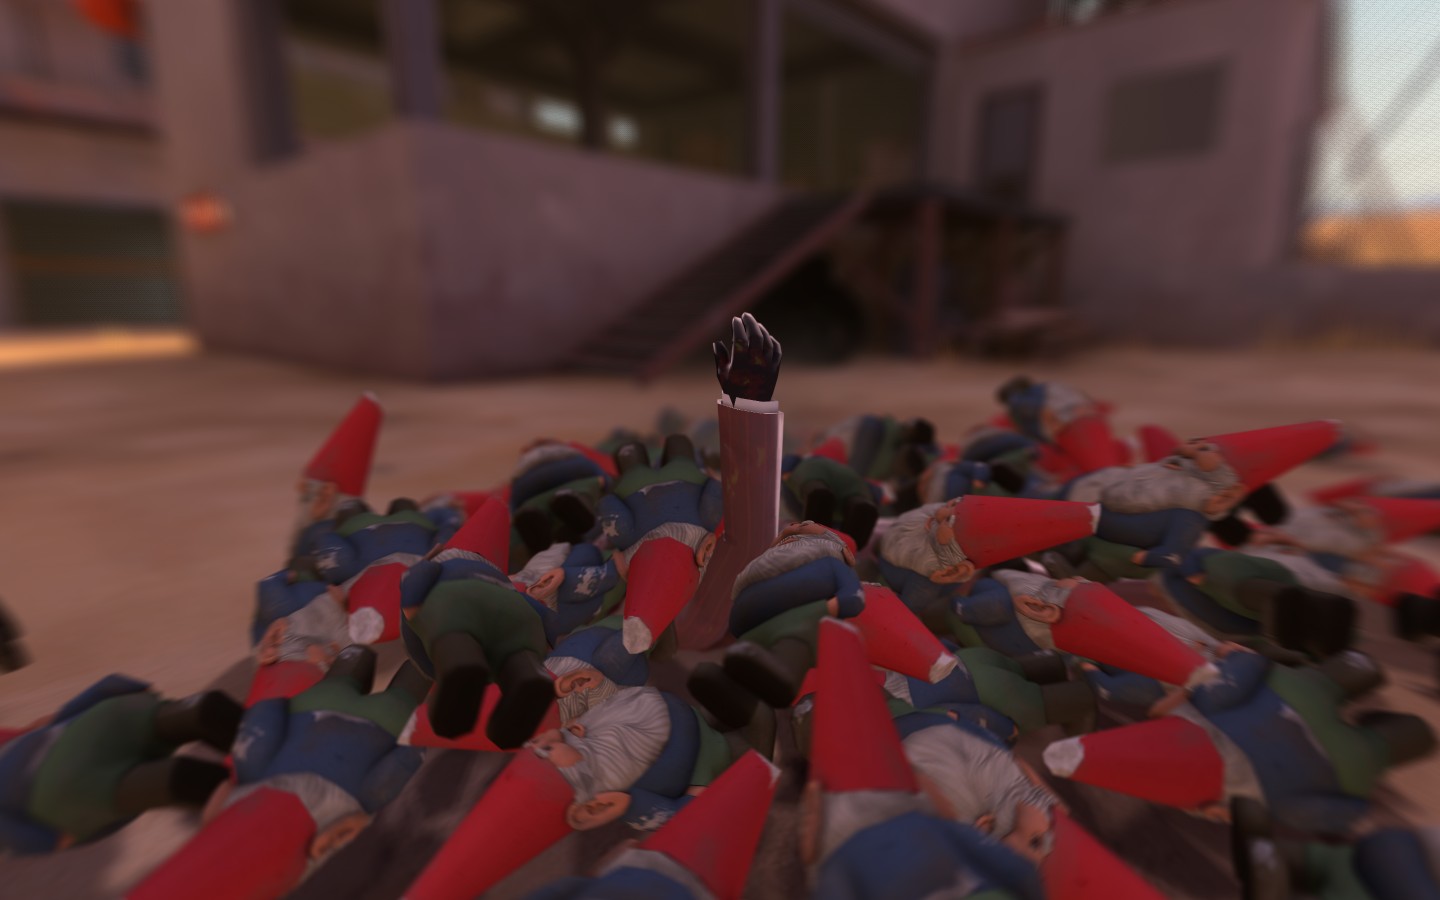 Spy Gmod Gnomes Team Fortres HD Wallpaper Of Games